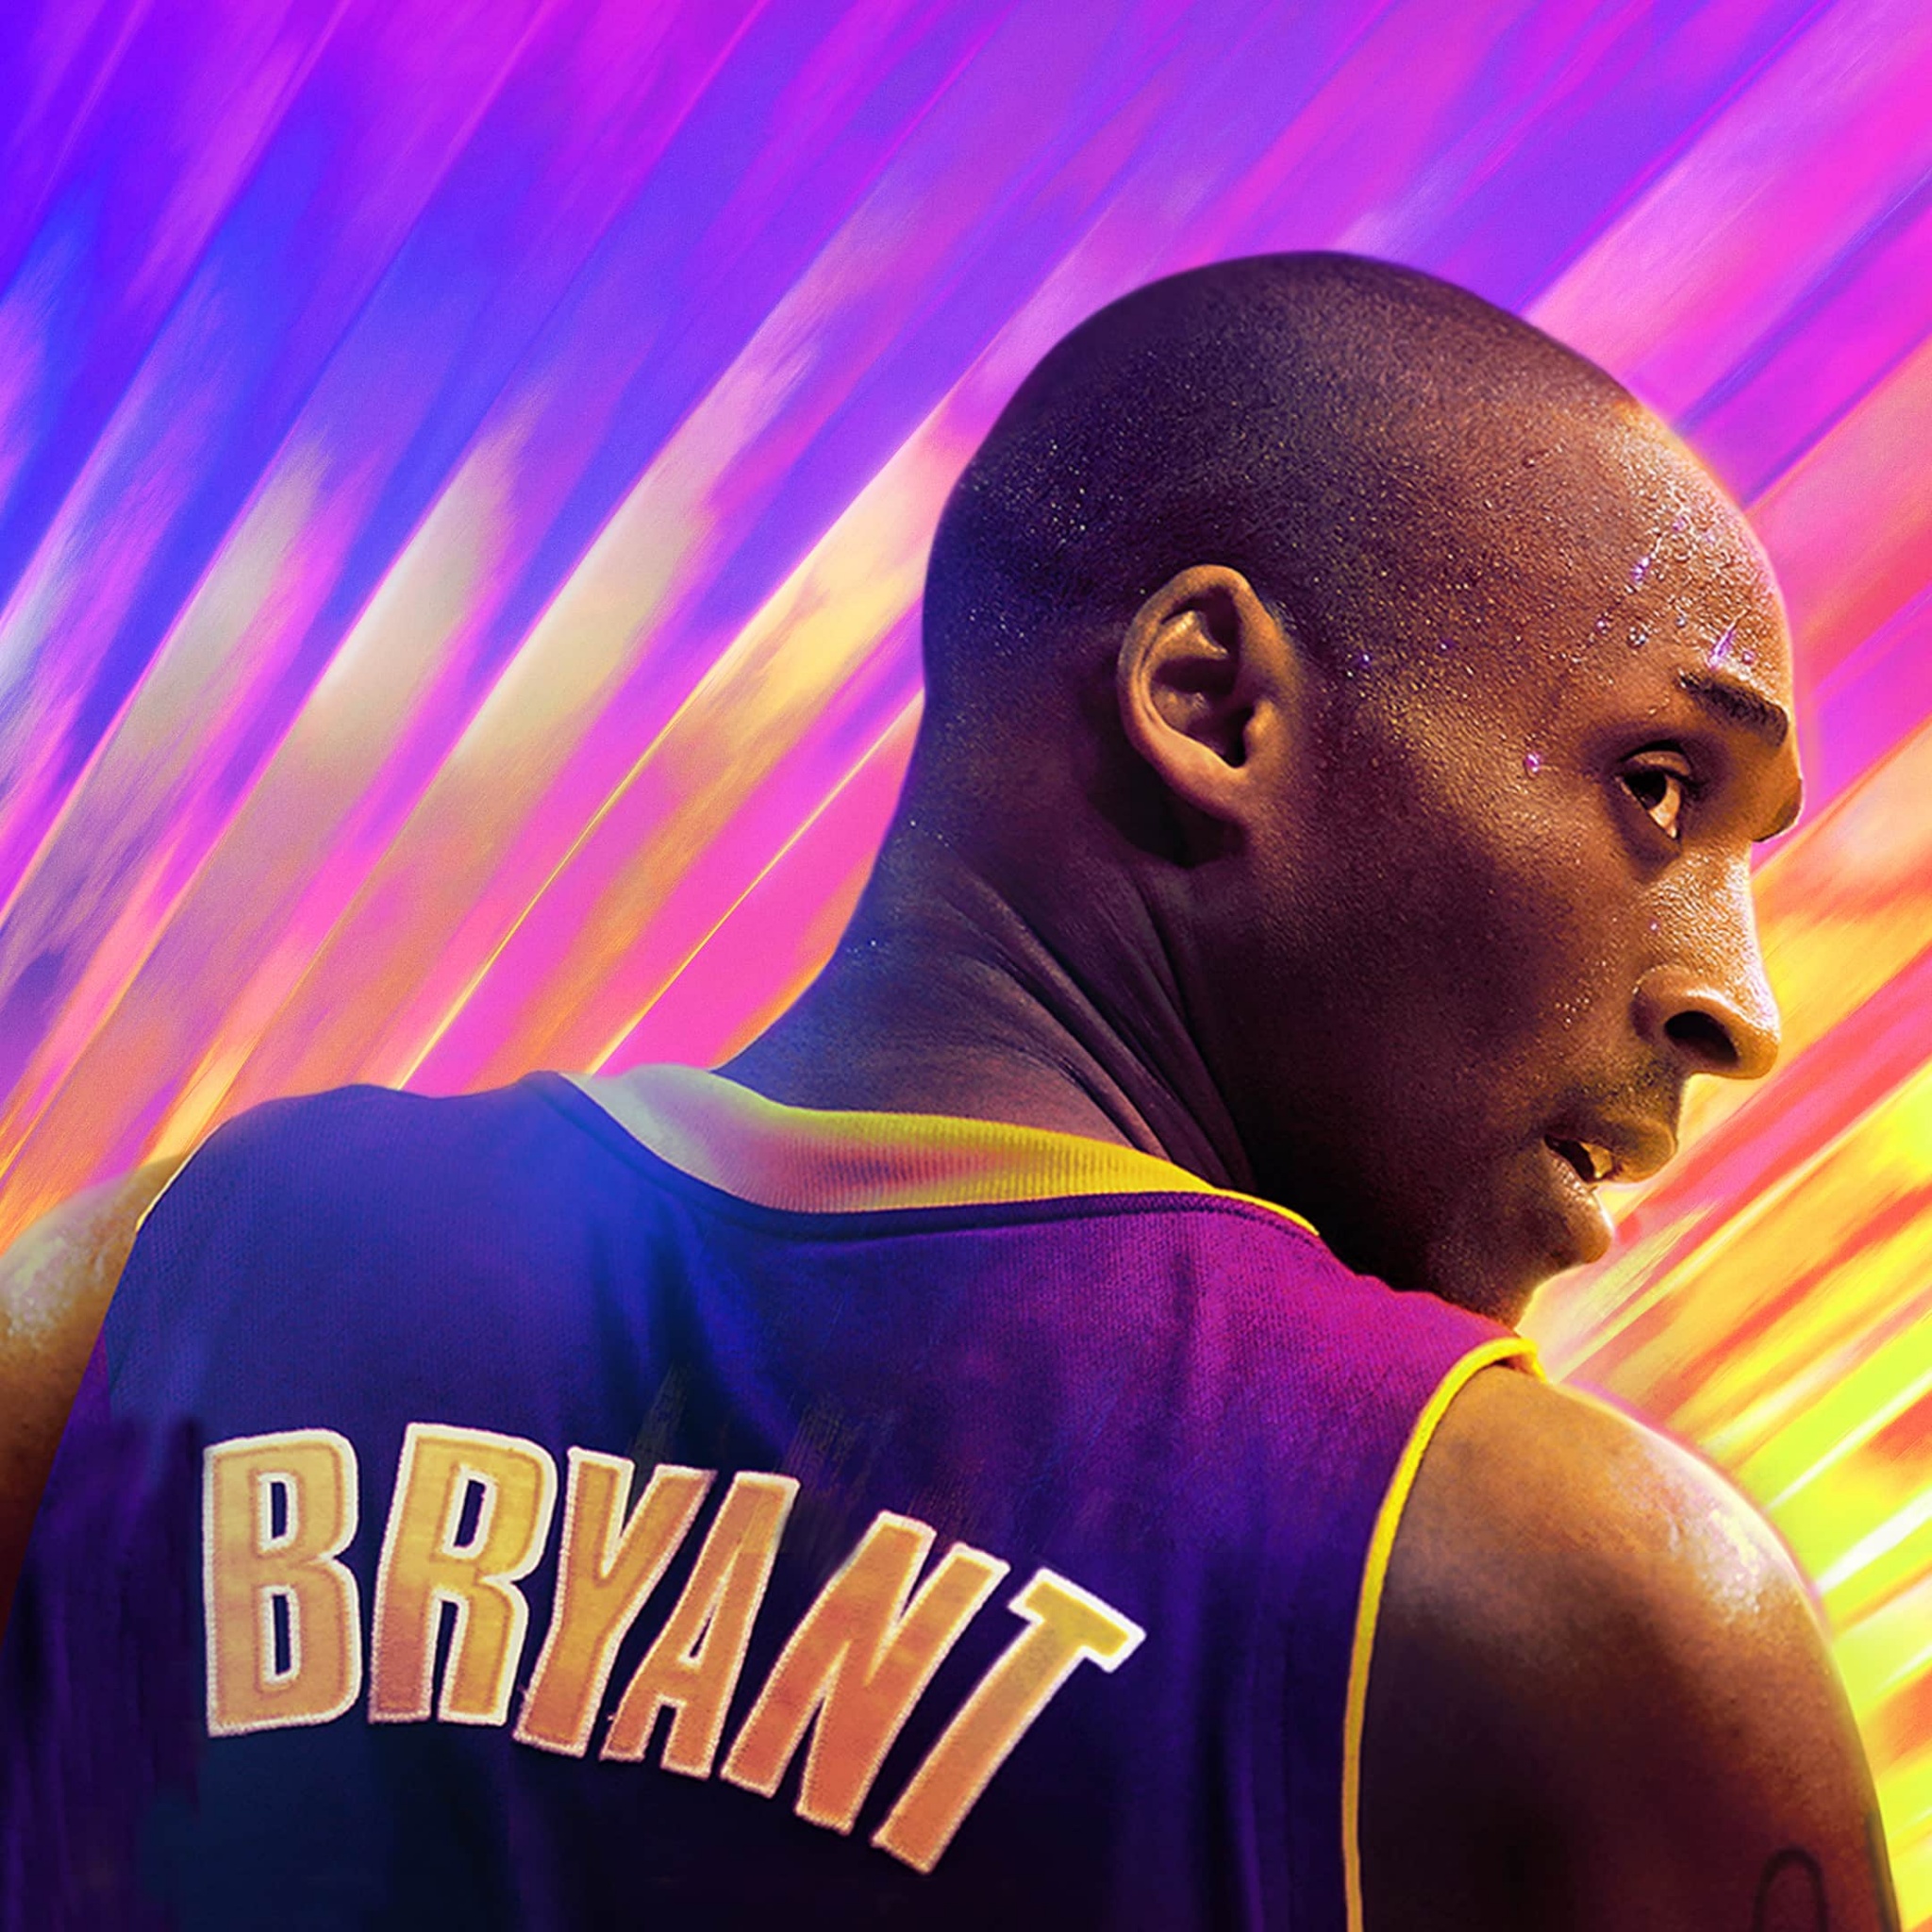 Kobe Bryant Fan Art, HD Sports, 4k Wallpapers, Images, Backgrounds, Photos  and Pictures